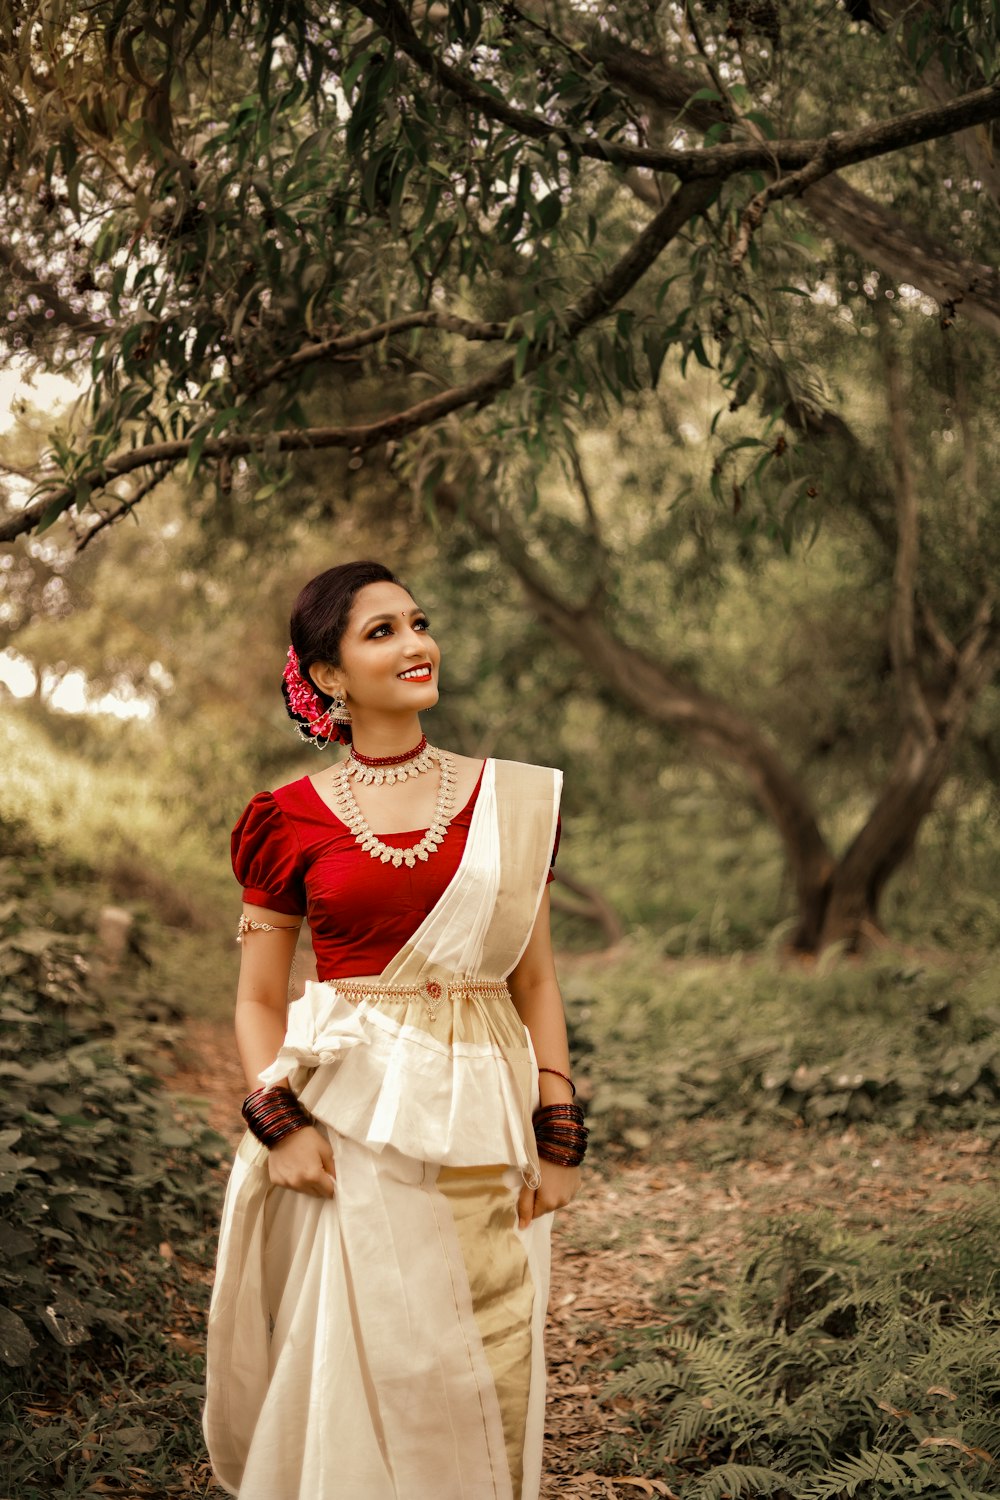 woman in red and white dress standing near trees during daytime